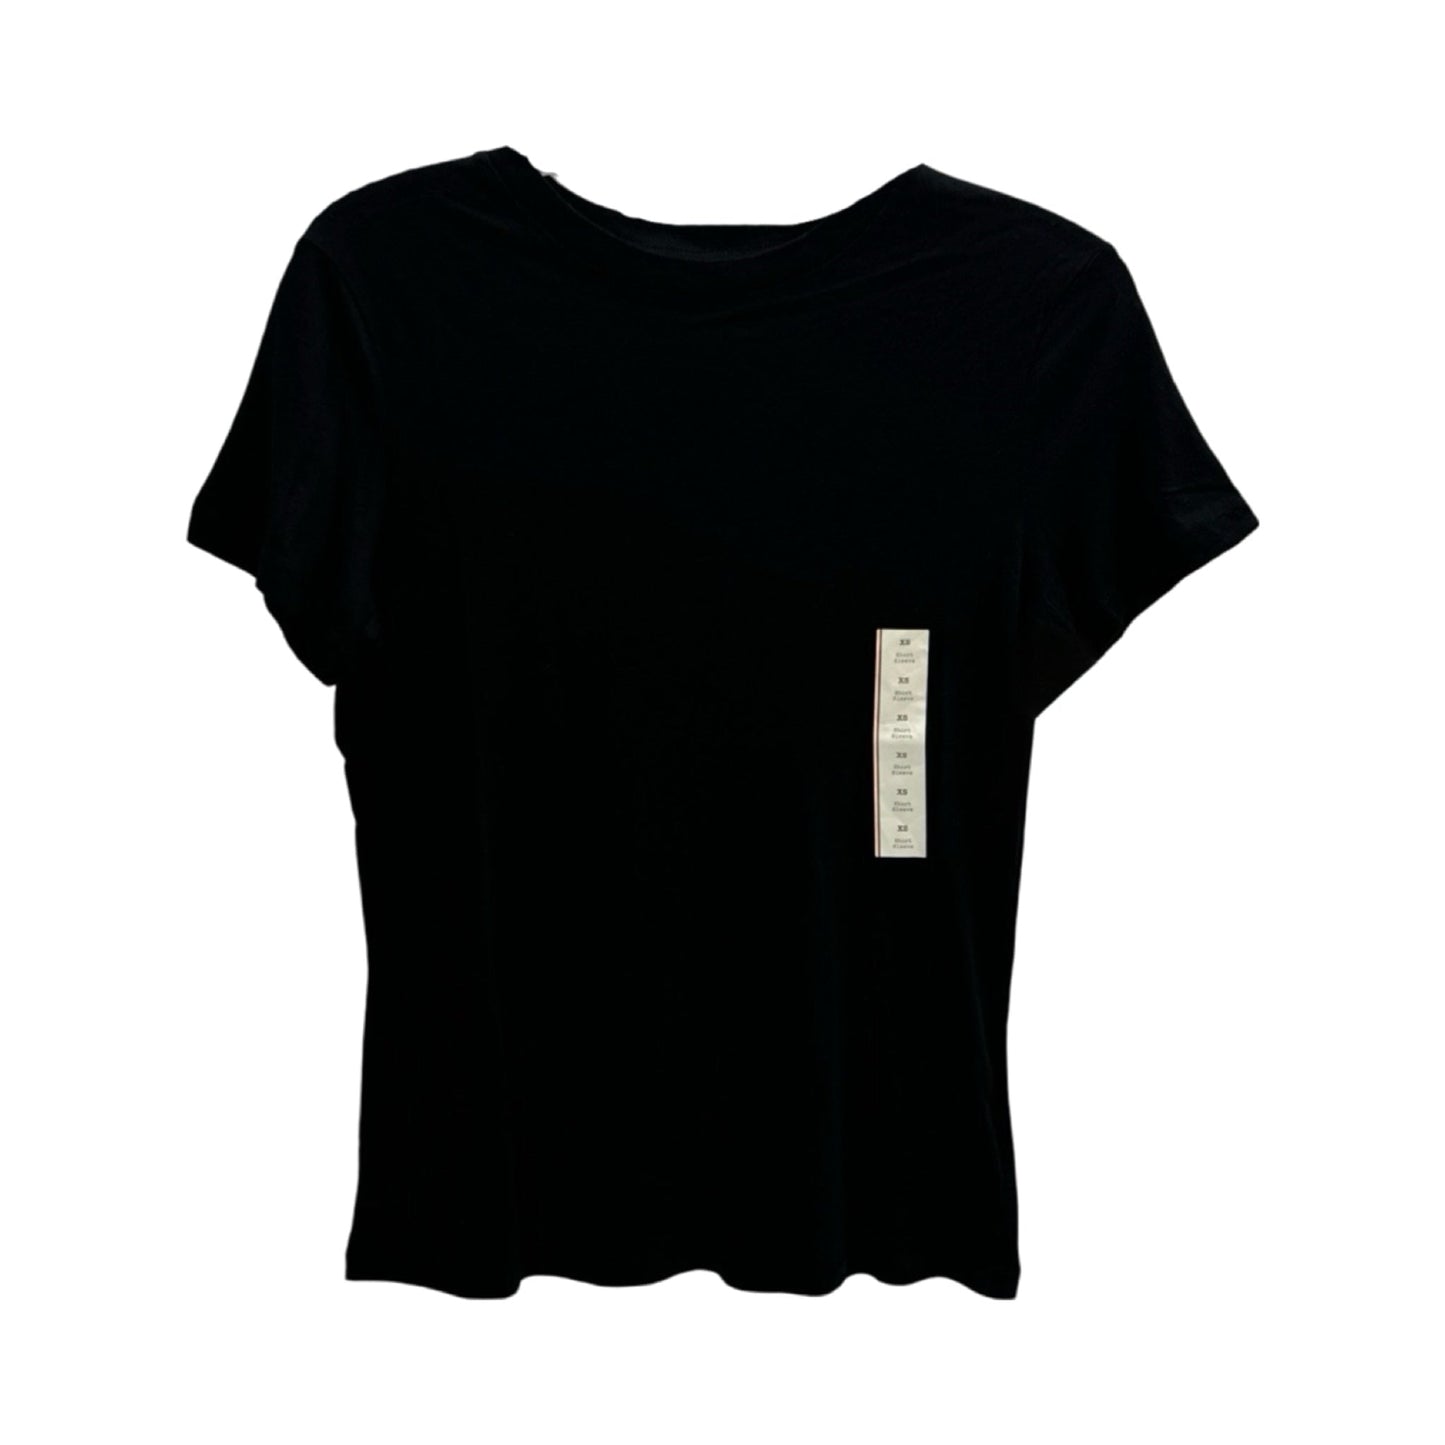 Black Top Short Sleeve A New Day, Size Xs